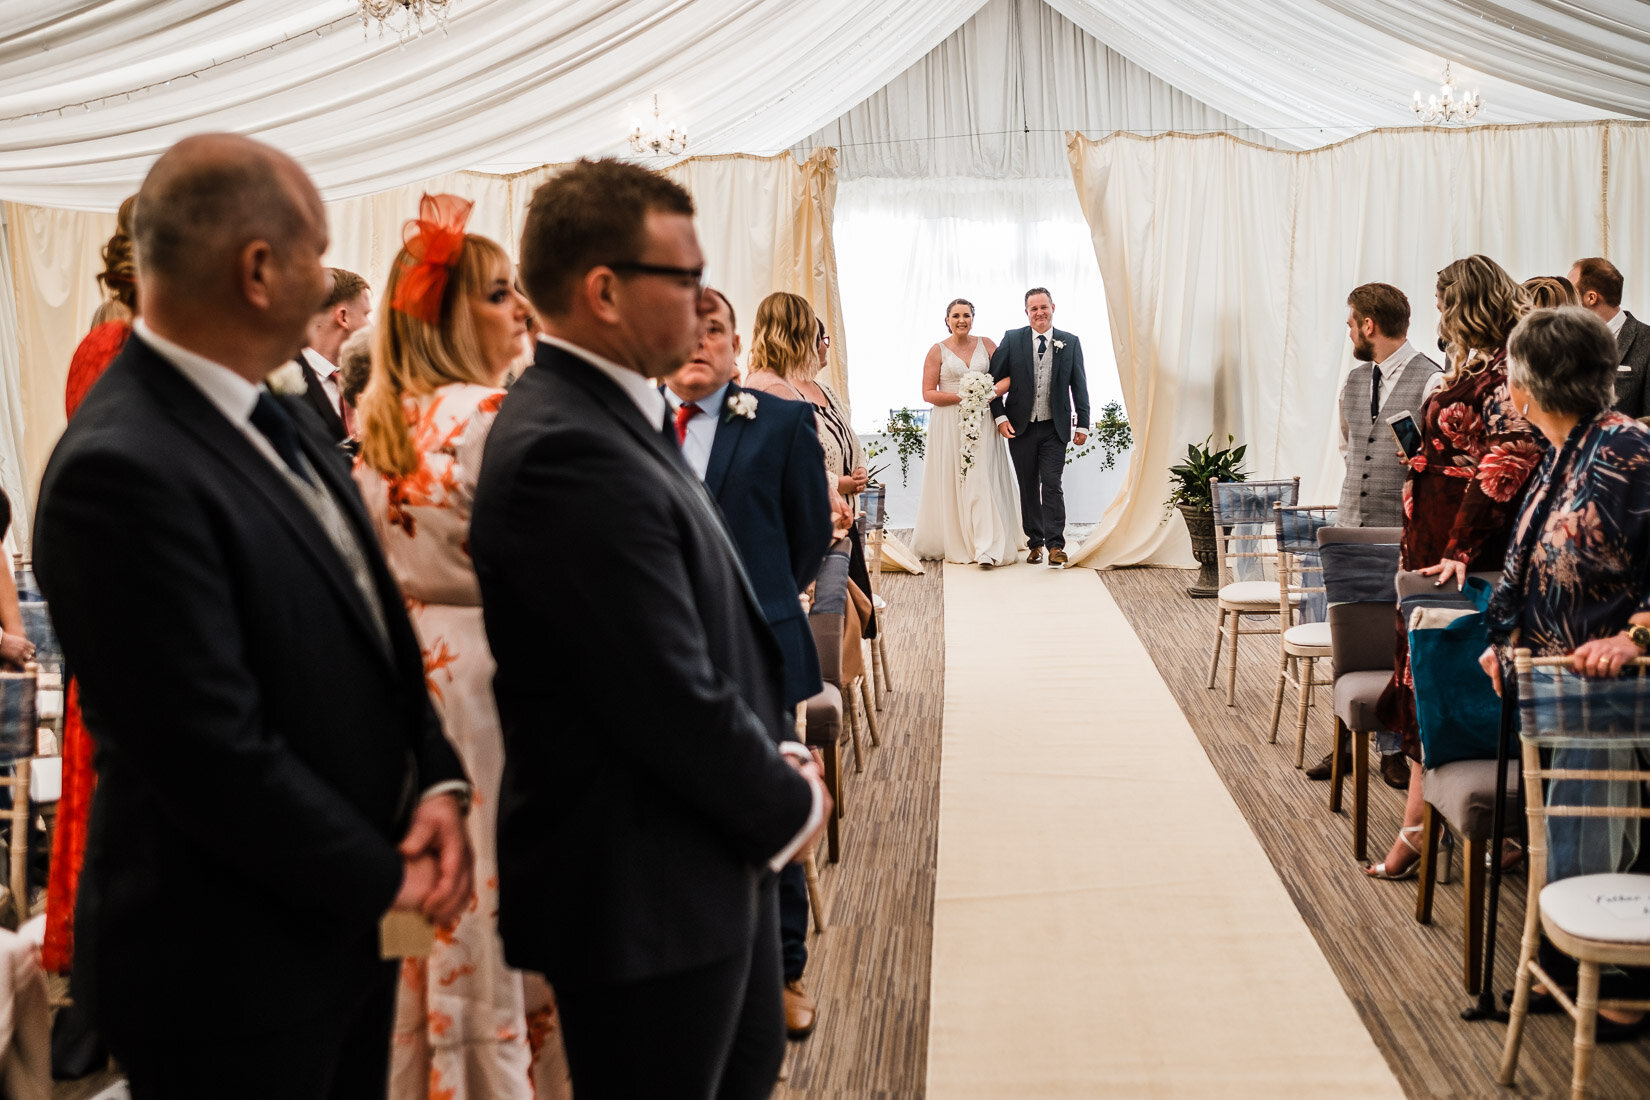  The Cotswolds Hotel and Spa wedding of Daisy and Luke from March 2020 